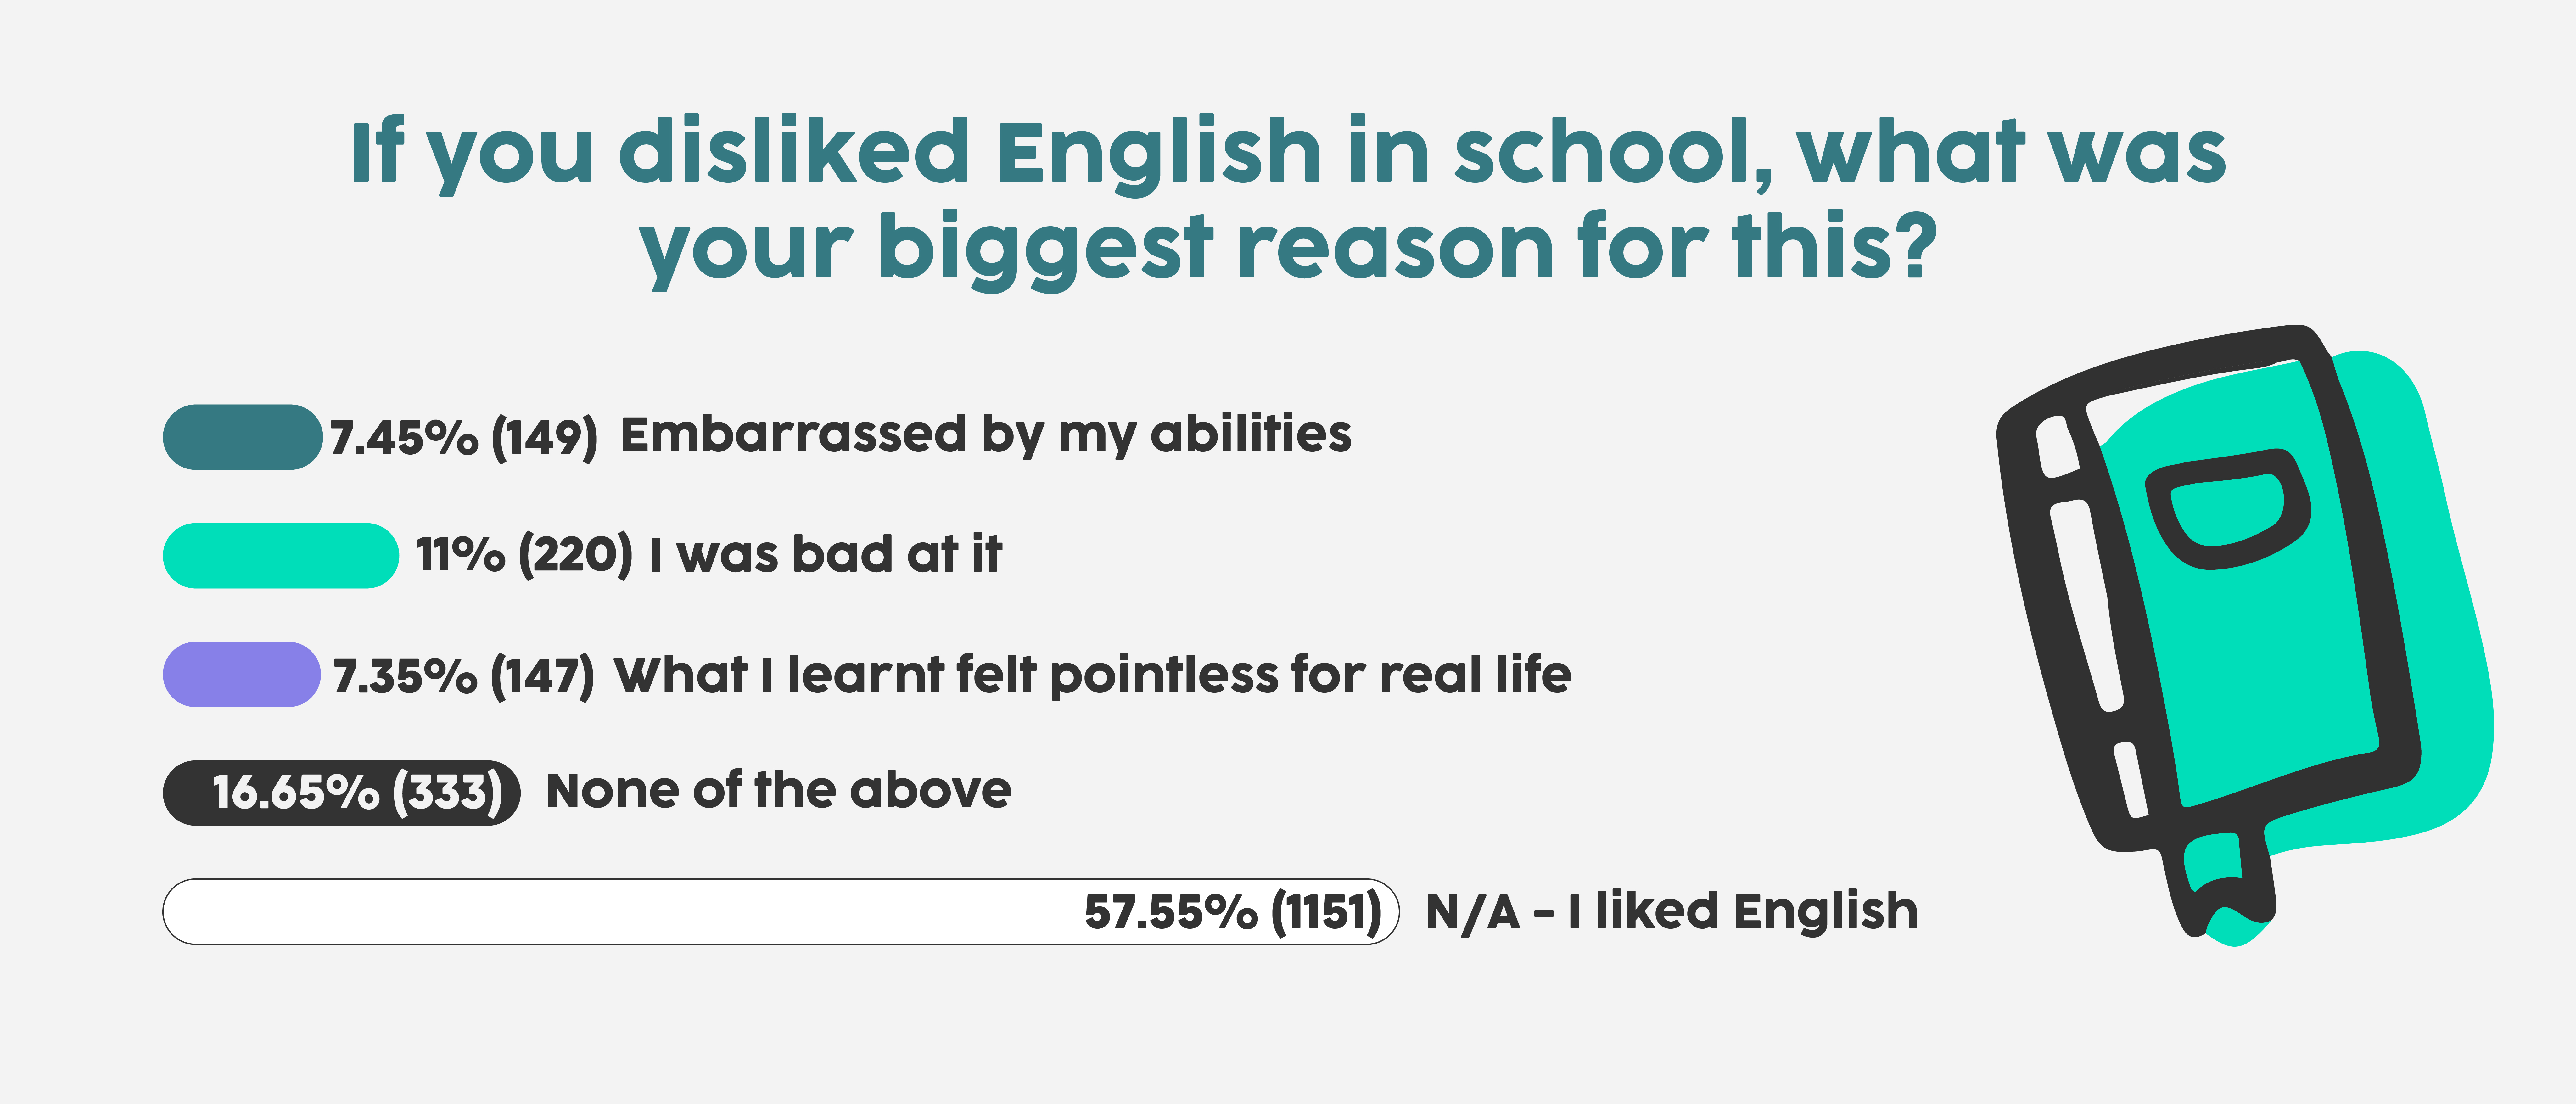 7.45% of adults disliked english in school because they were embarrassed by their abilities.